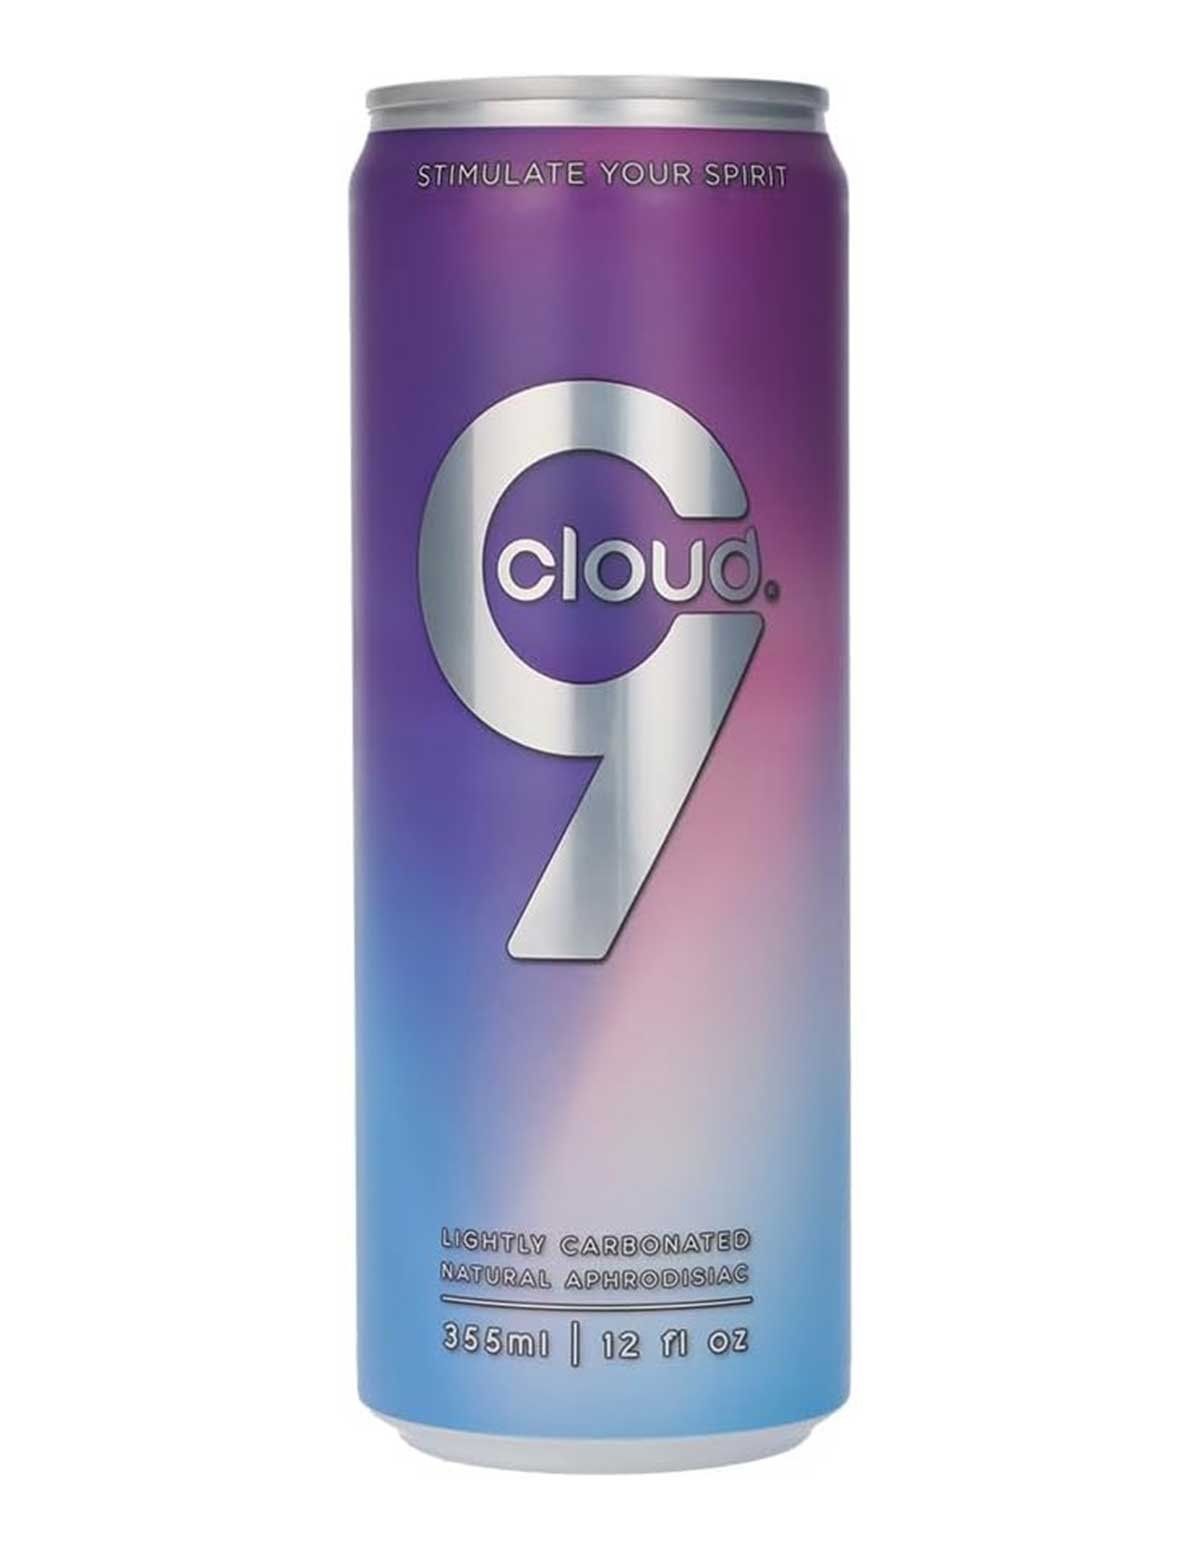 Cloud 9 Natural Aphrodisiac Drink picture